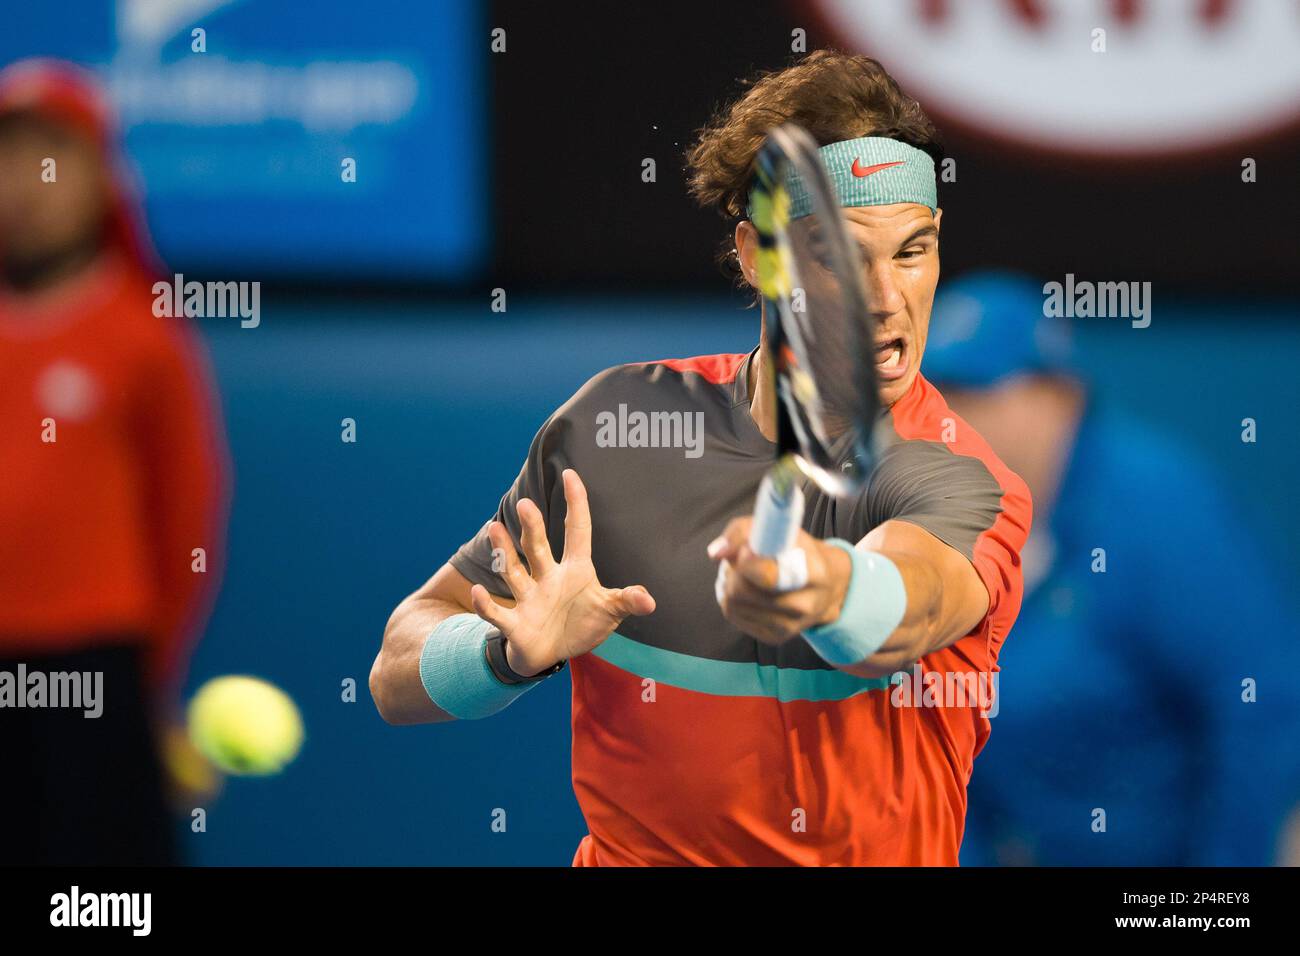 Jan. 24, 2014 - Melbourne, Victoria, Australia - January 24, 2014: 1st seed  Rafael NADAL (ESP) in action against 6th seed Roger FEDERER (SUI) in a  Semifinals match on day 12 of